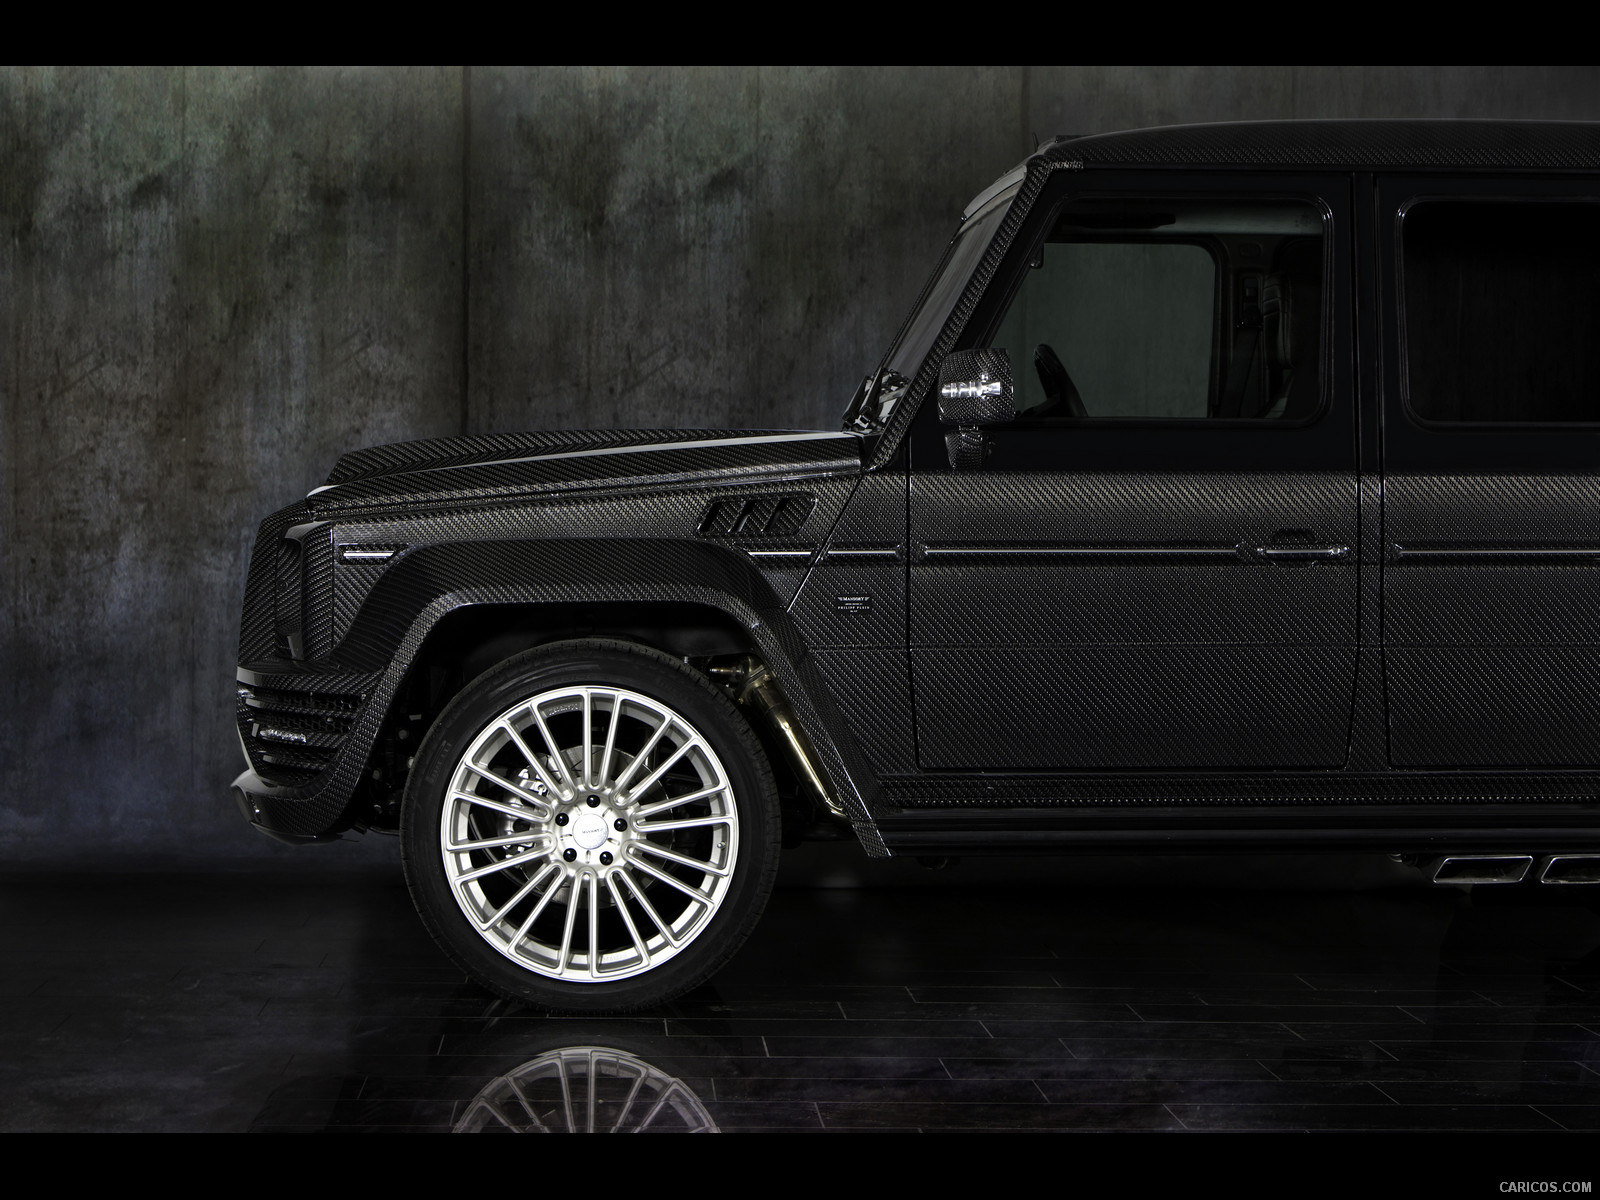 Mansory G-Couture based on Mercedes G-Class  - Side, #6 of 39